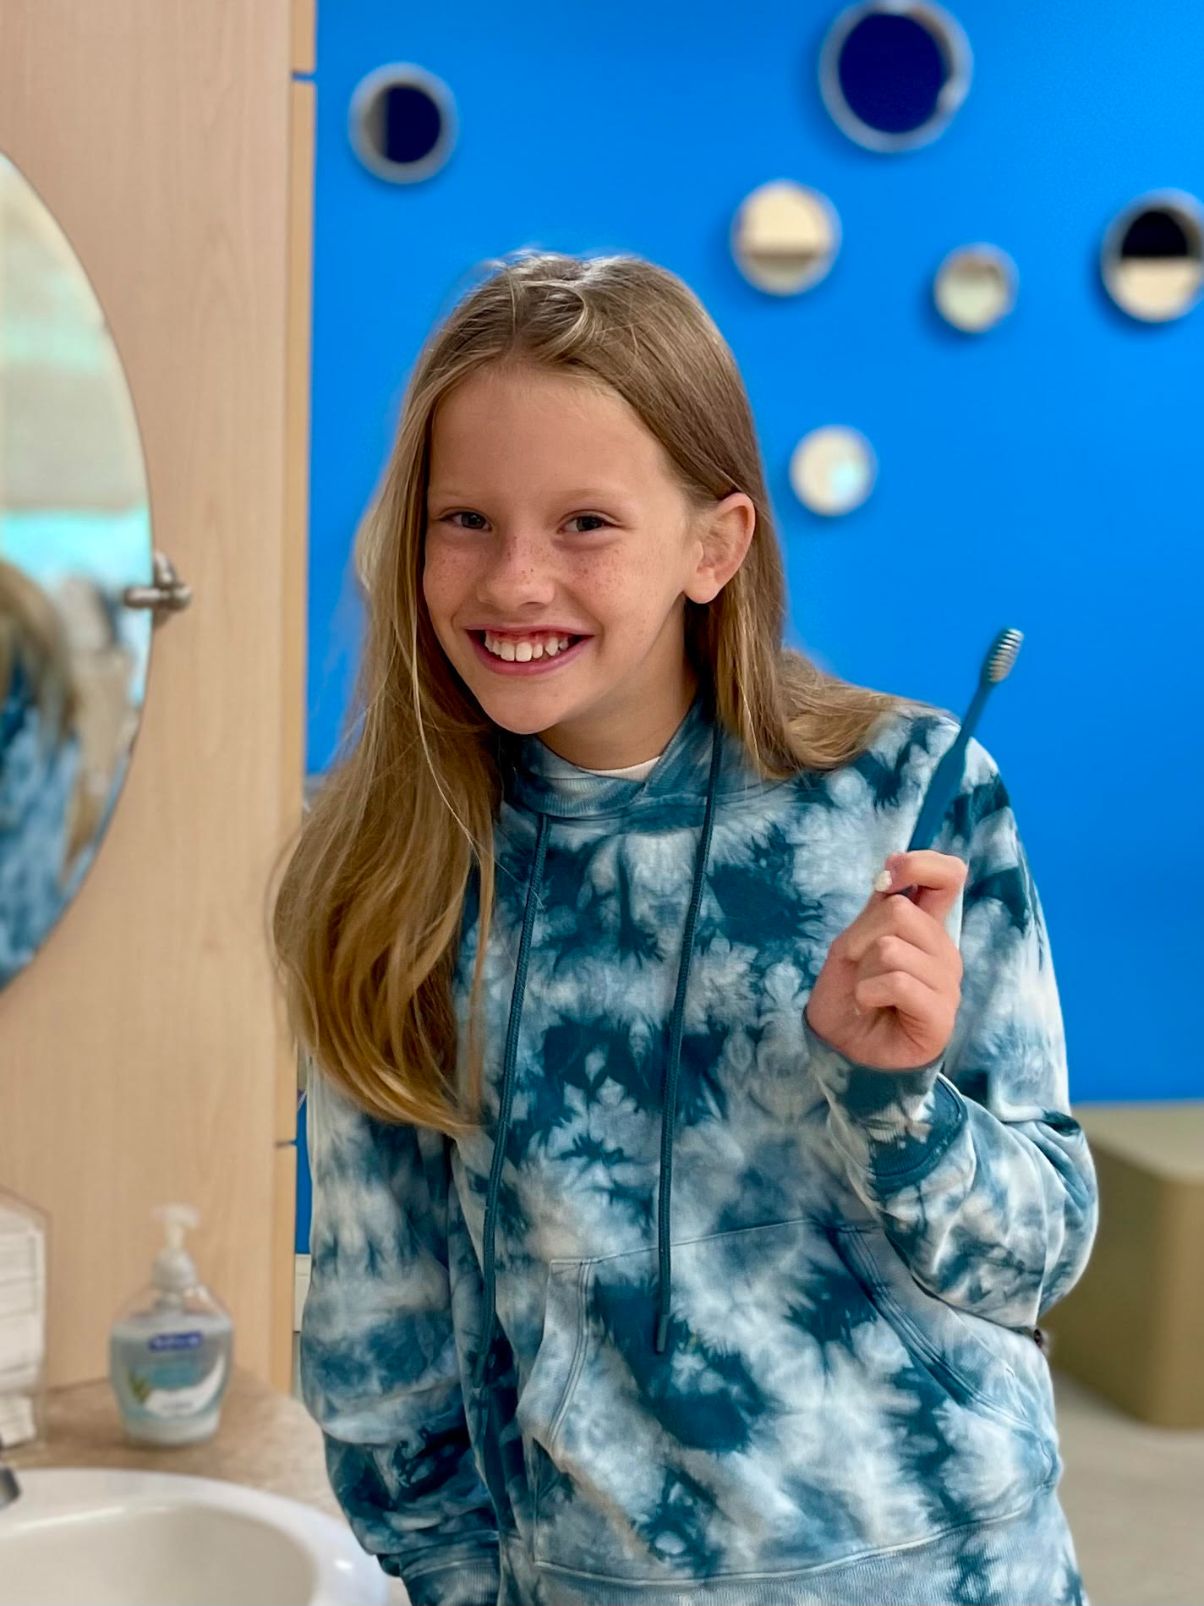 A girl holding a toothbrush in her hand.